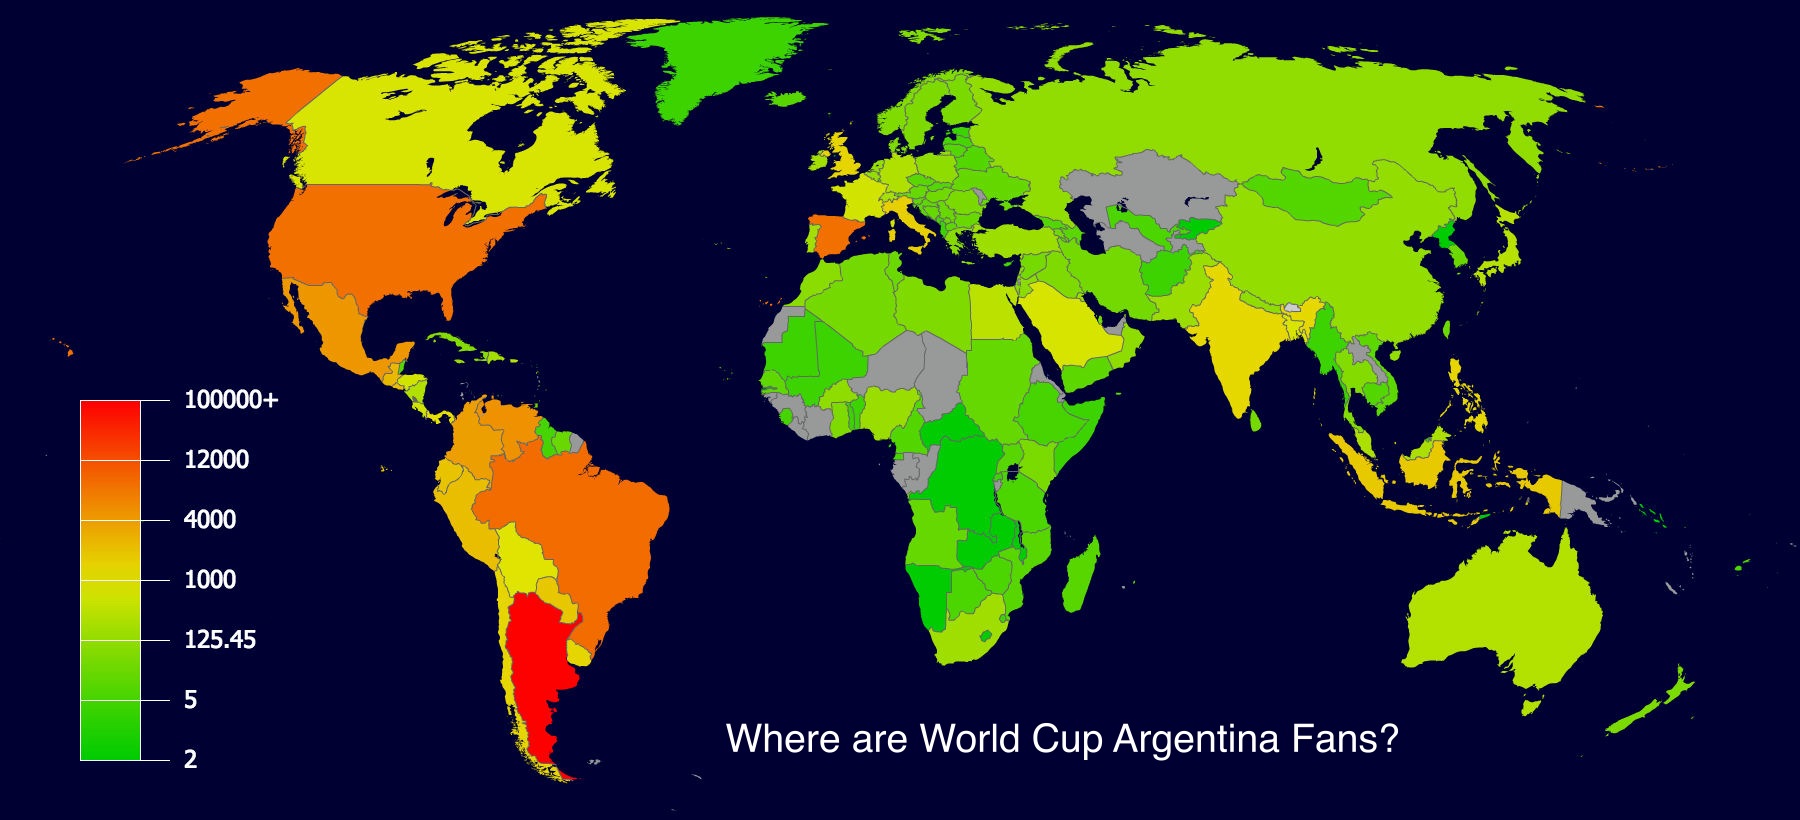 Argentina World Cup Fans